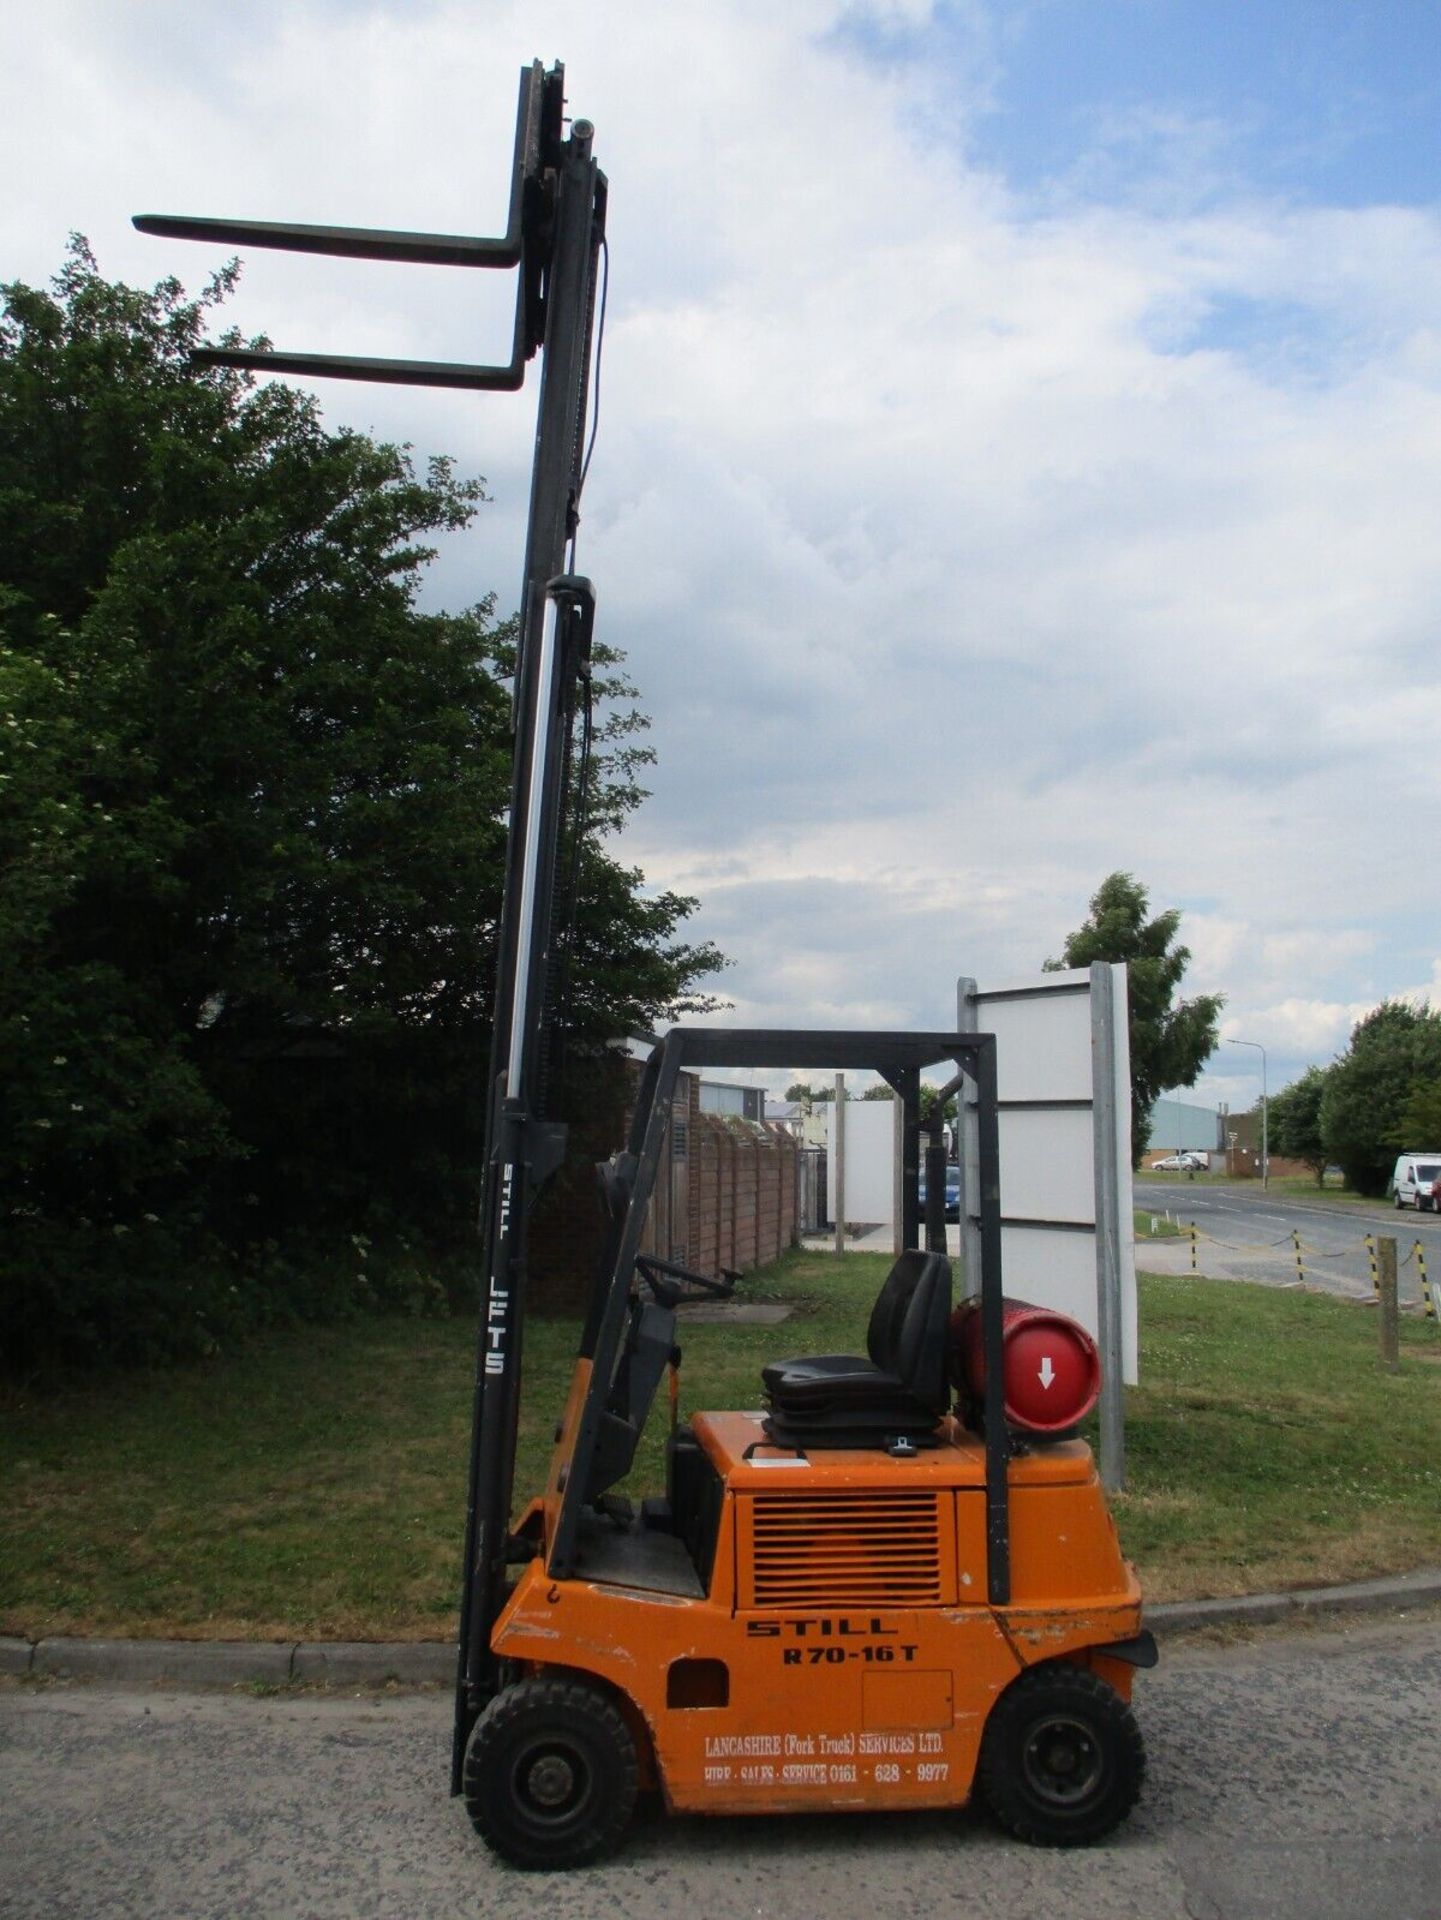 STILL R70-16T: PRECISION LIFTING UP TO 1600KG - Image 10 of 12